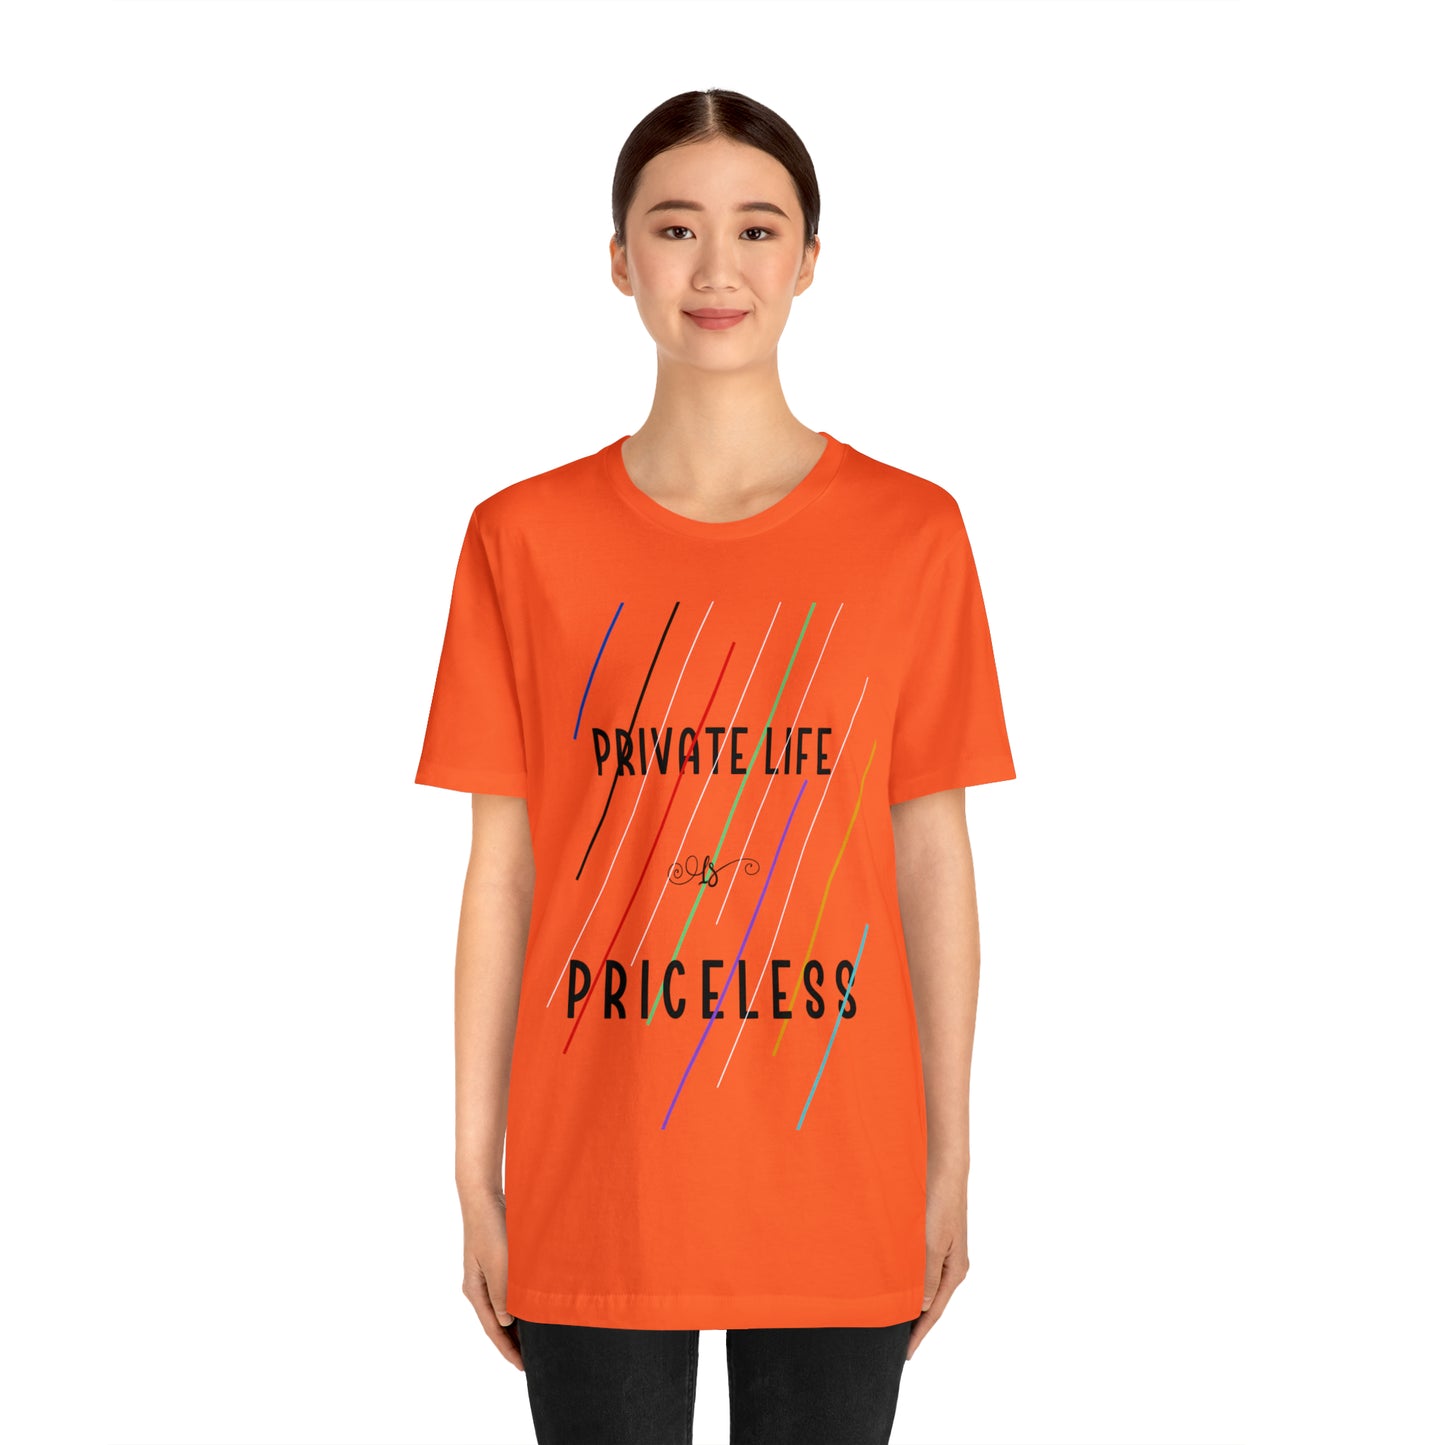 Private life Unisex Jersey Short Sleeve Tee